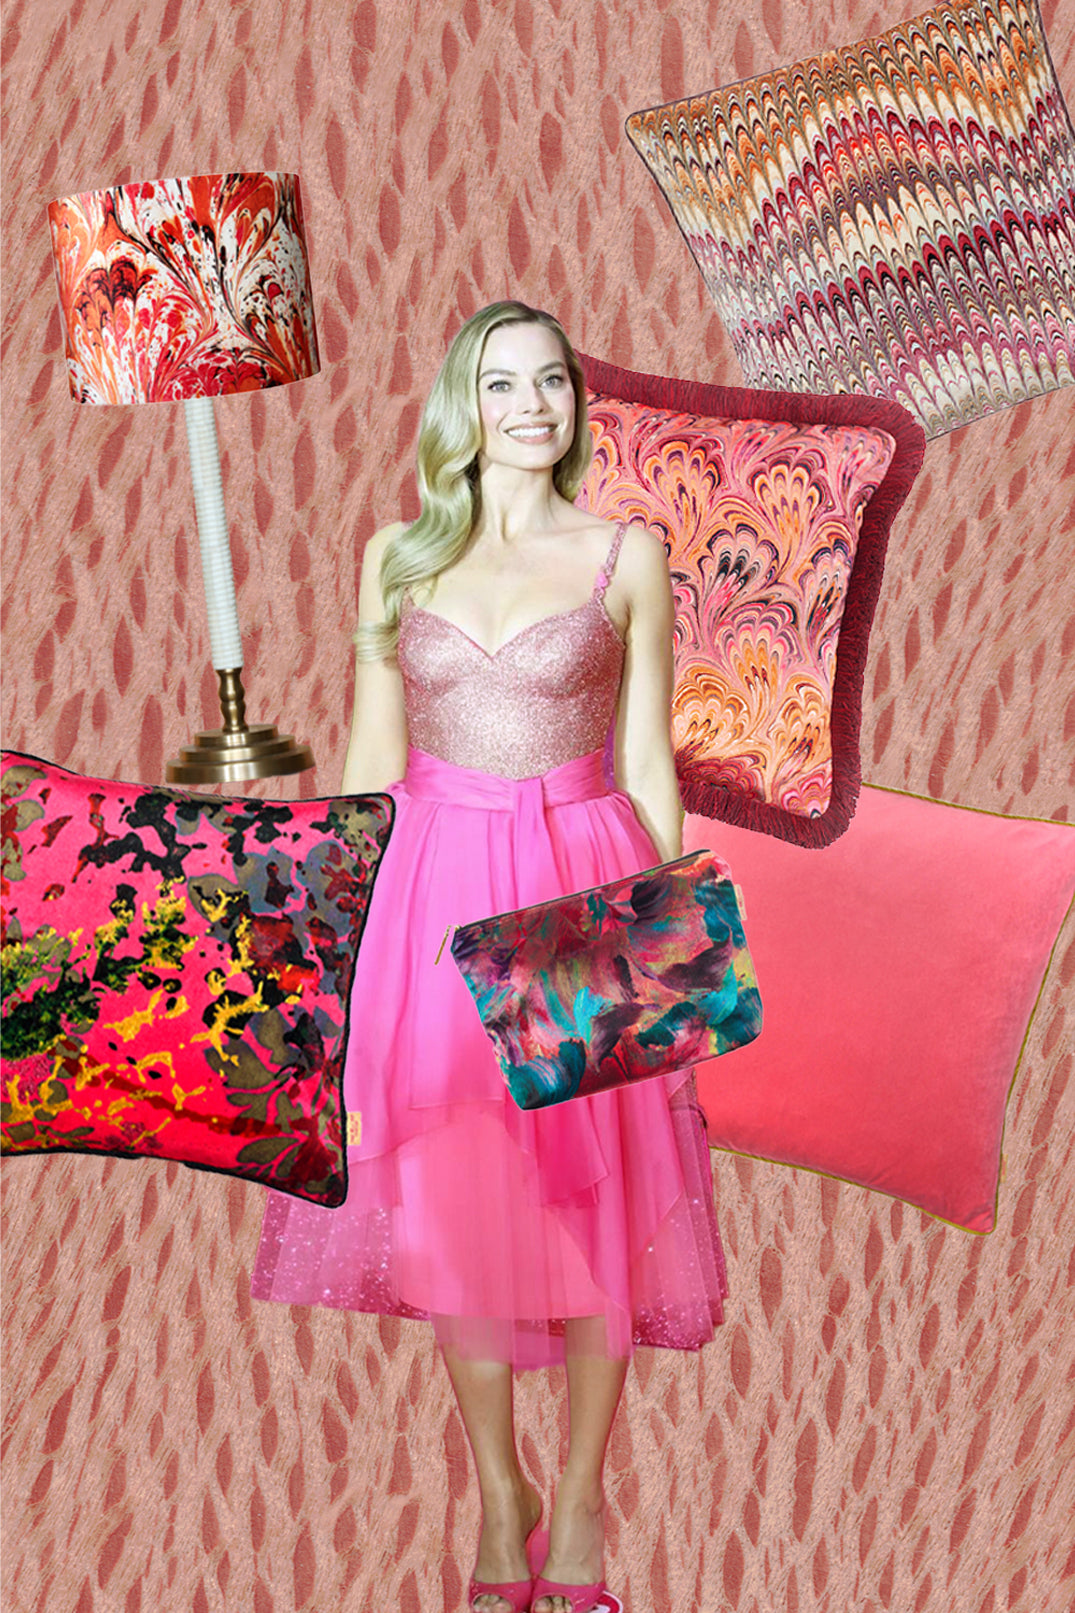 Margot Robbie as Barbie in a pink tulle dress against some velvet cushions in different pink shades